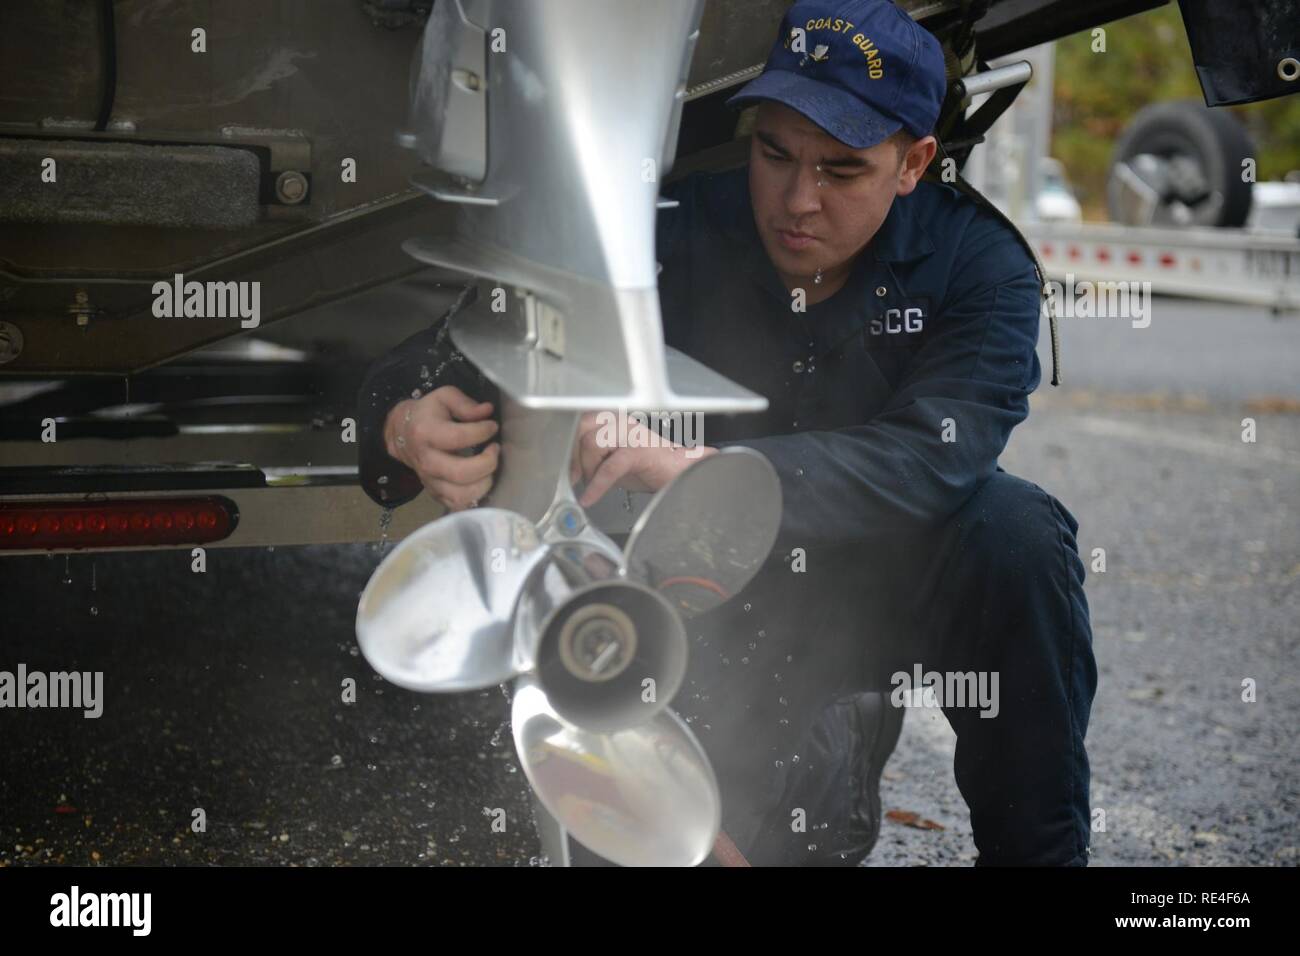 Petty Officer 3rd Class Thomas Aveni, a machinery technician at Coast Guard Station St. Inigoes, troubleshoots a faulty outboard engine while at the unit Wednesday, Nov. 30, 2016. Machinery technicians, or MKs, are trained to work on boat engines, hydraulics and can also serve as electricians. U.S. Coast Guard Stock Photo